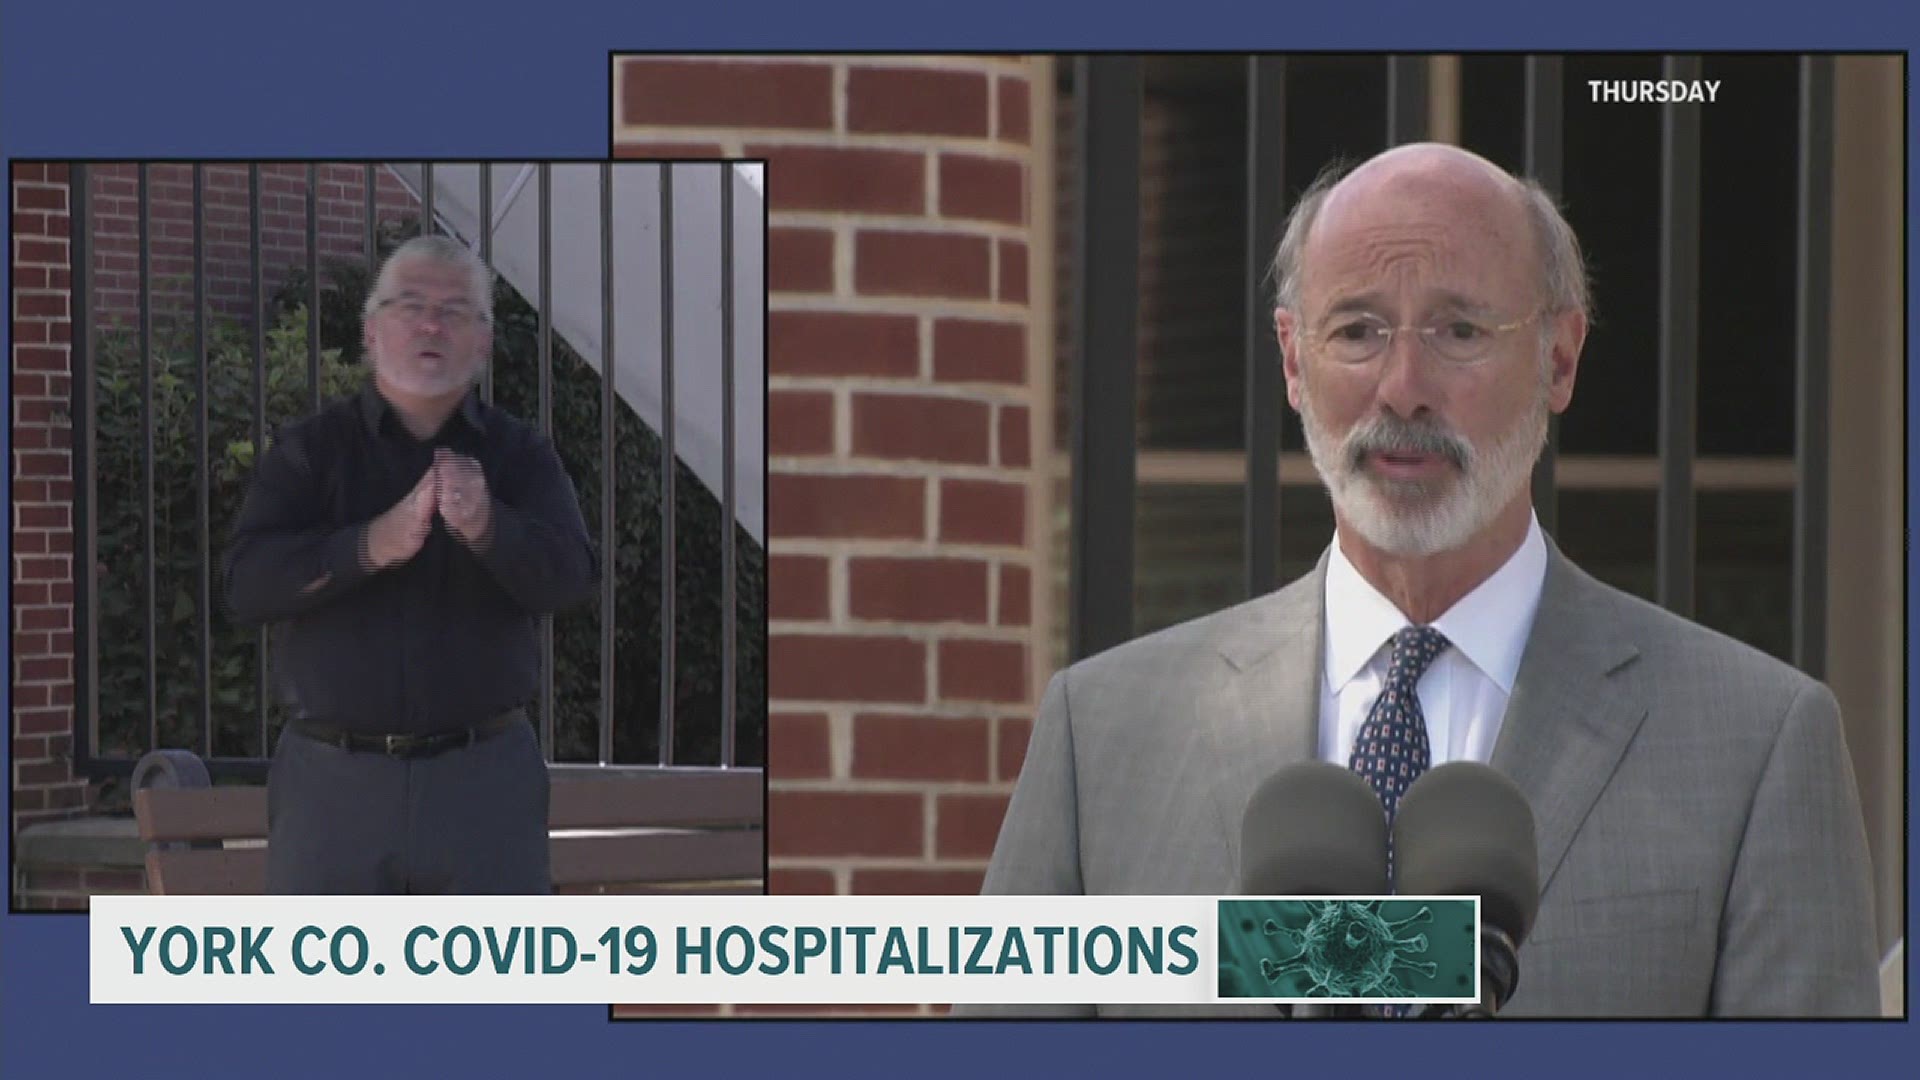 York County has 93 hospitalizations, just behind Philadelphia County, which has 117 patients hospitalized for COVID-19.